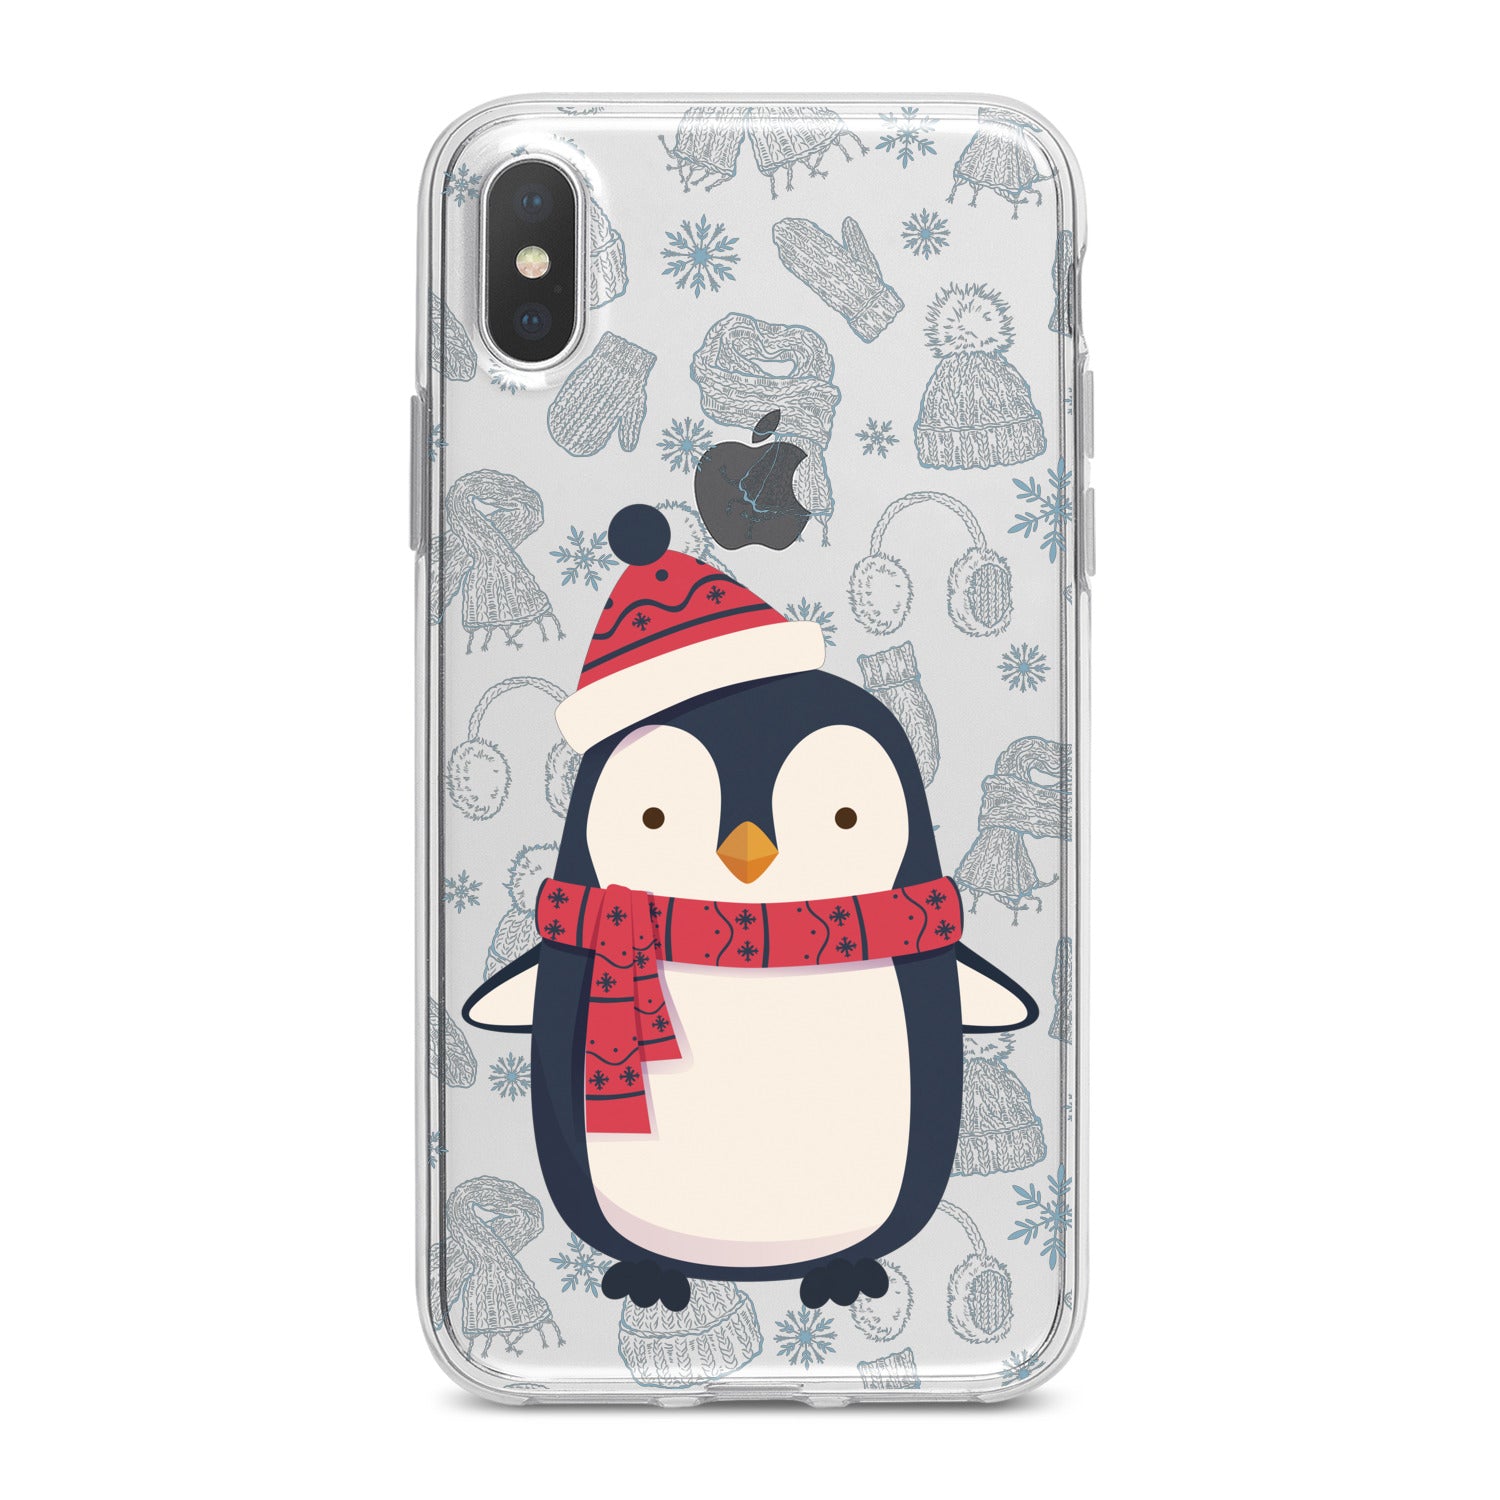 Lex Altern Cute Penguin Phone Case for your iPhone & Android phone.